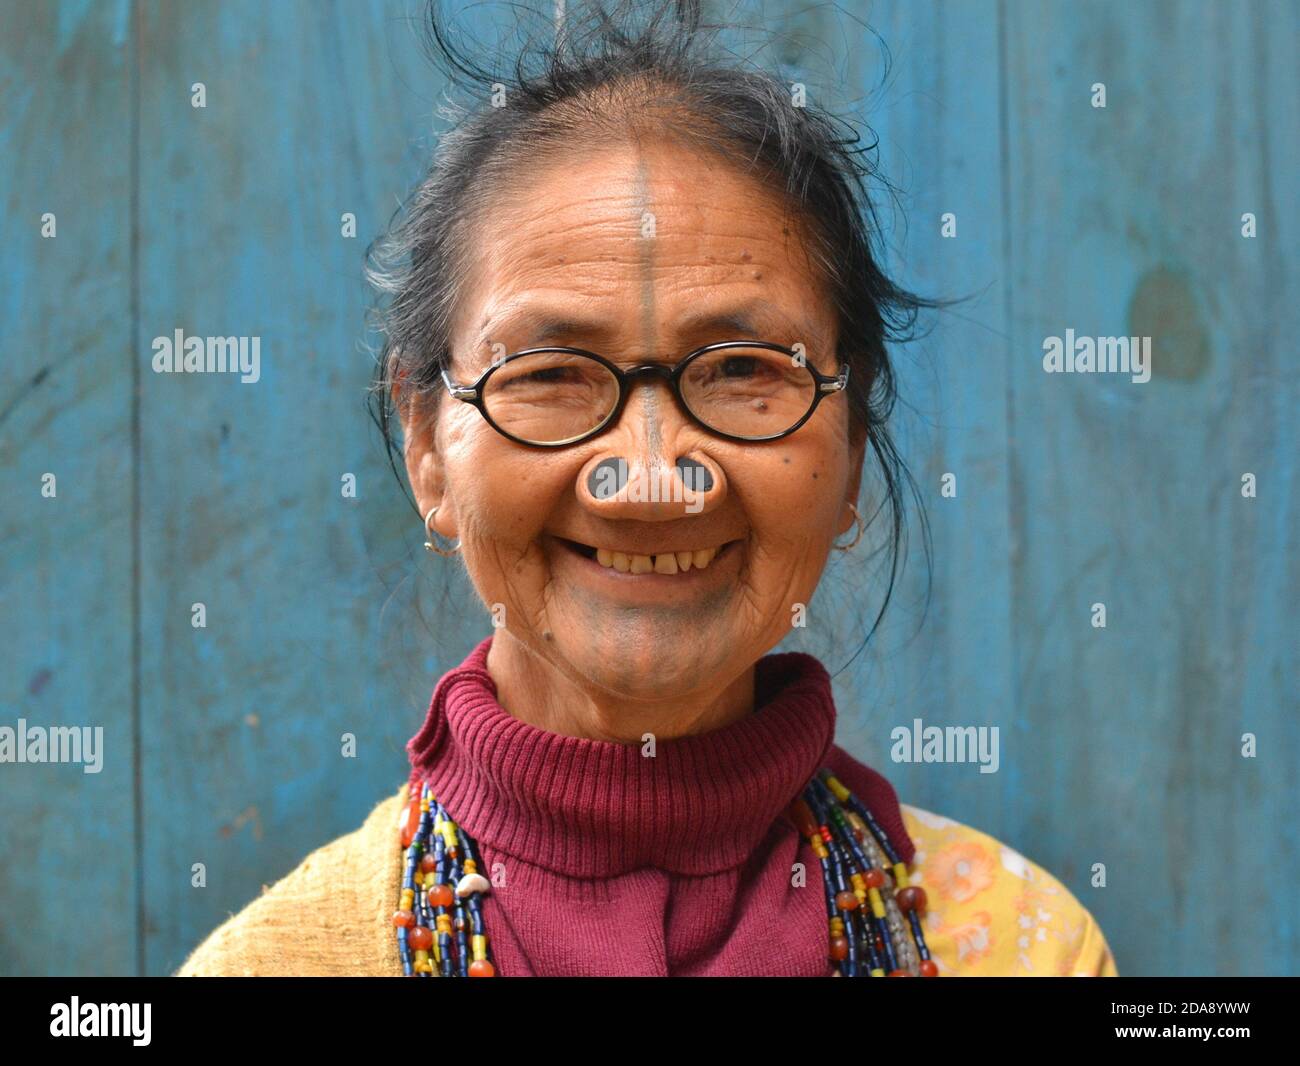 Old Northeast Indian Apatani tribal woman with black wooden nose plugs and traditional face tattoo wears modern eyeglasses and smiles for the camera. Stock Photo